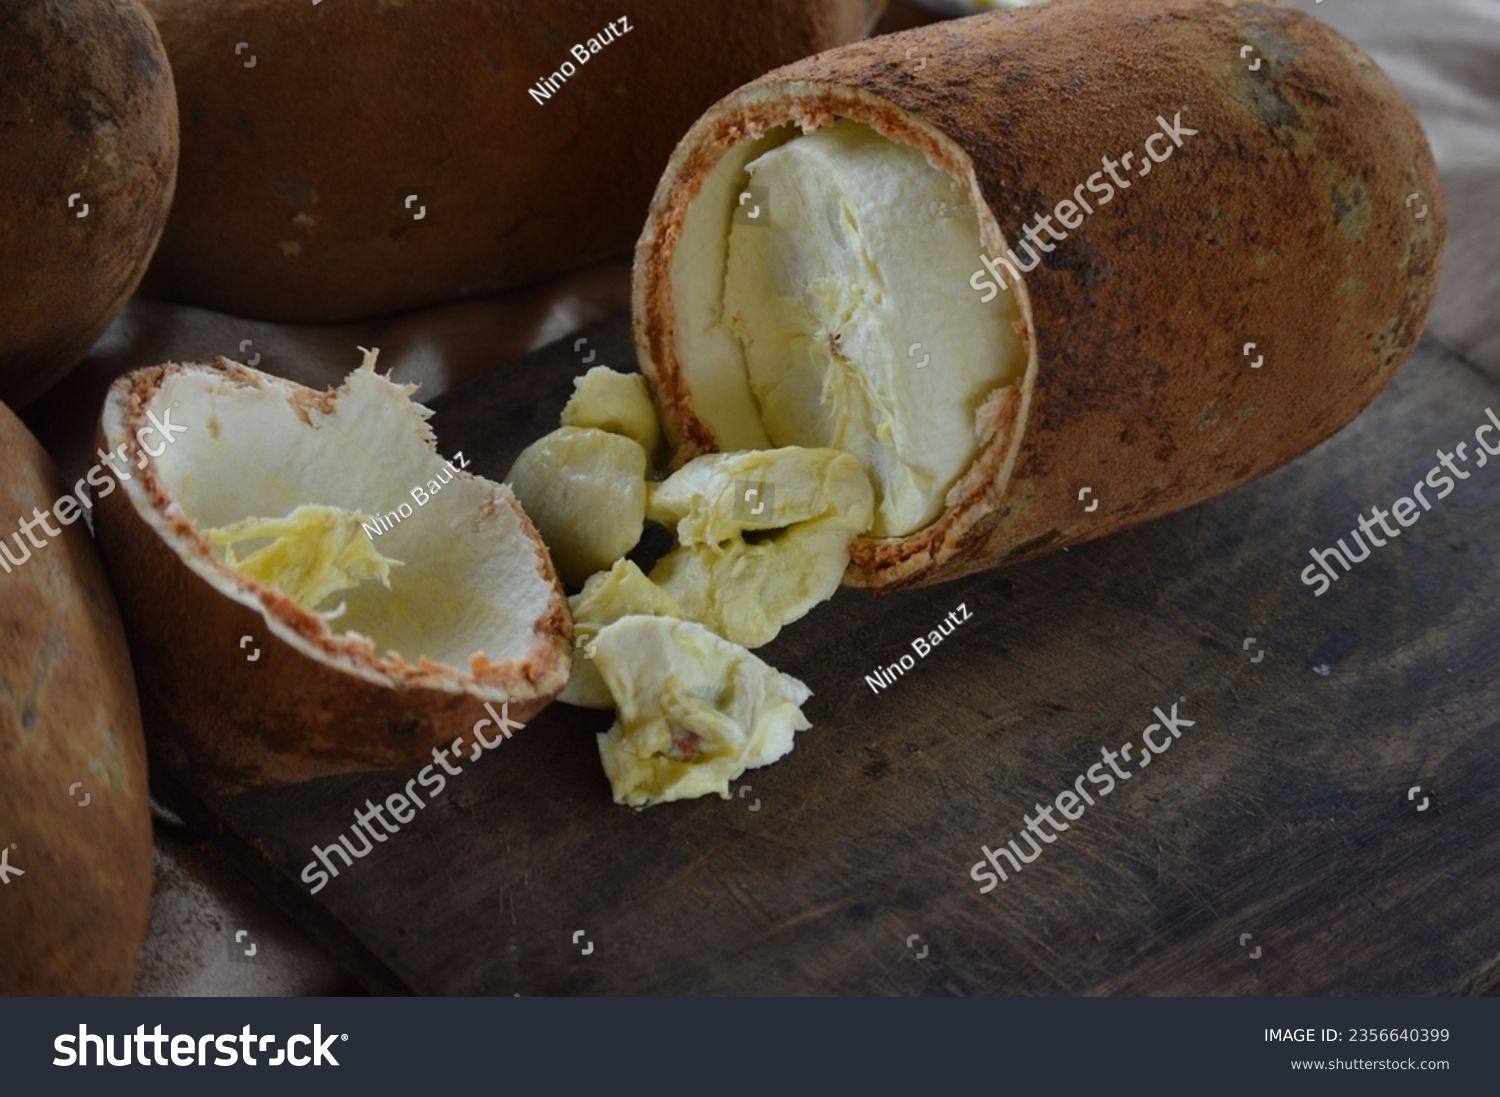 Pulp of fresh cupuaçu fruit coming out of the open fruit on the wooden board. Cupuacu fruit (Theobroma grandiflorum), malvaceae family, pulp and seeds of a tropical cupuacu fruit, Amazon, Brazil #2356640399